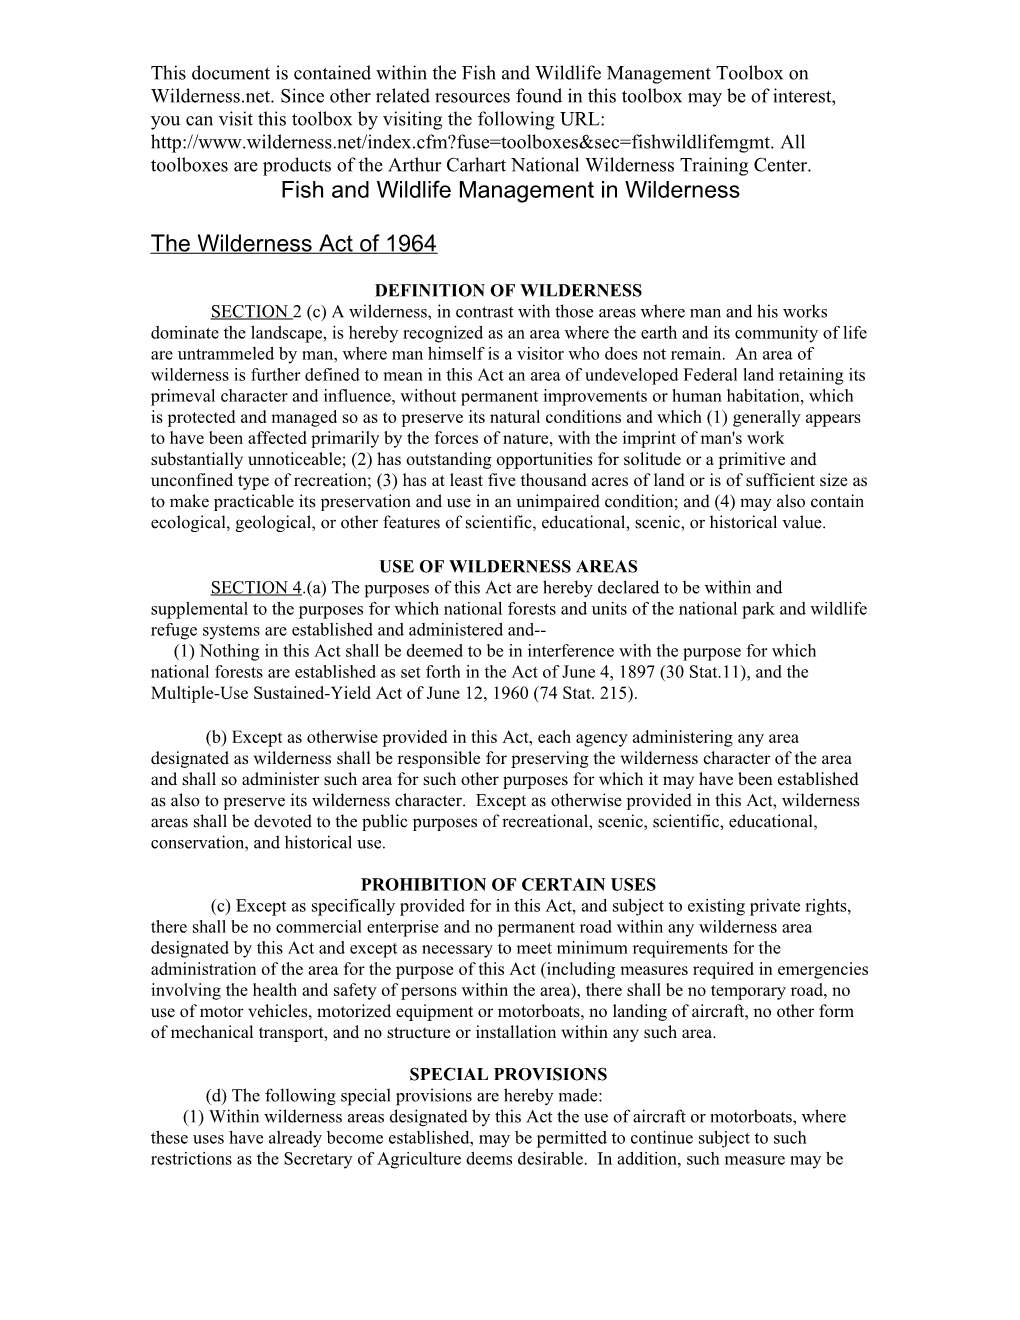 Fish and Wildlife Management in Wilderness